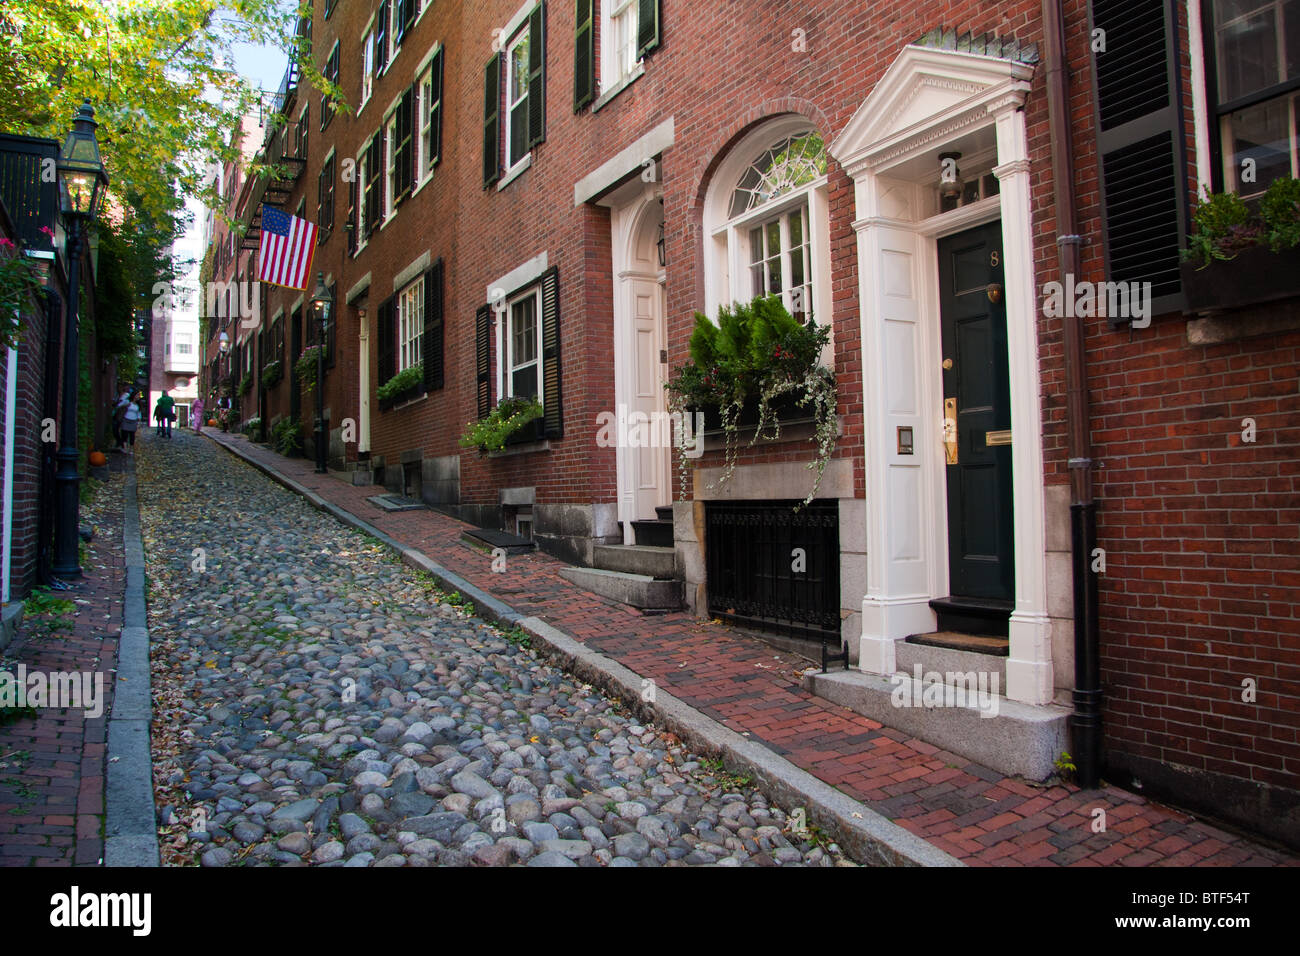 A picturesque street in Boston, MA Stock Photo